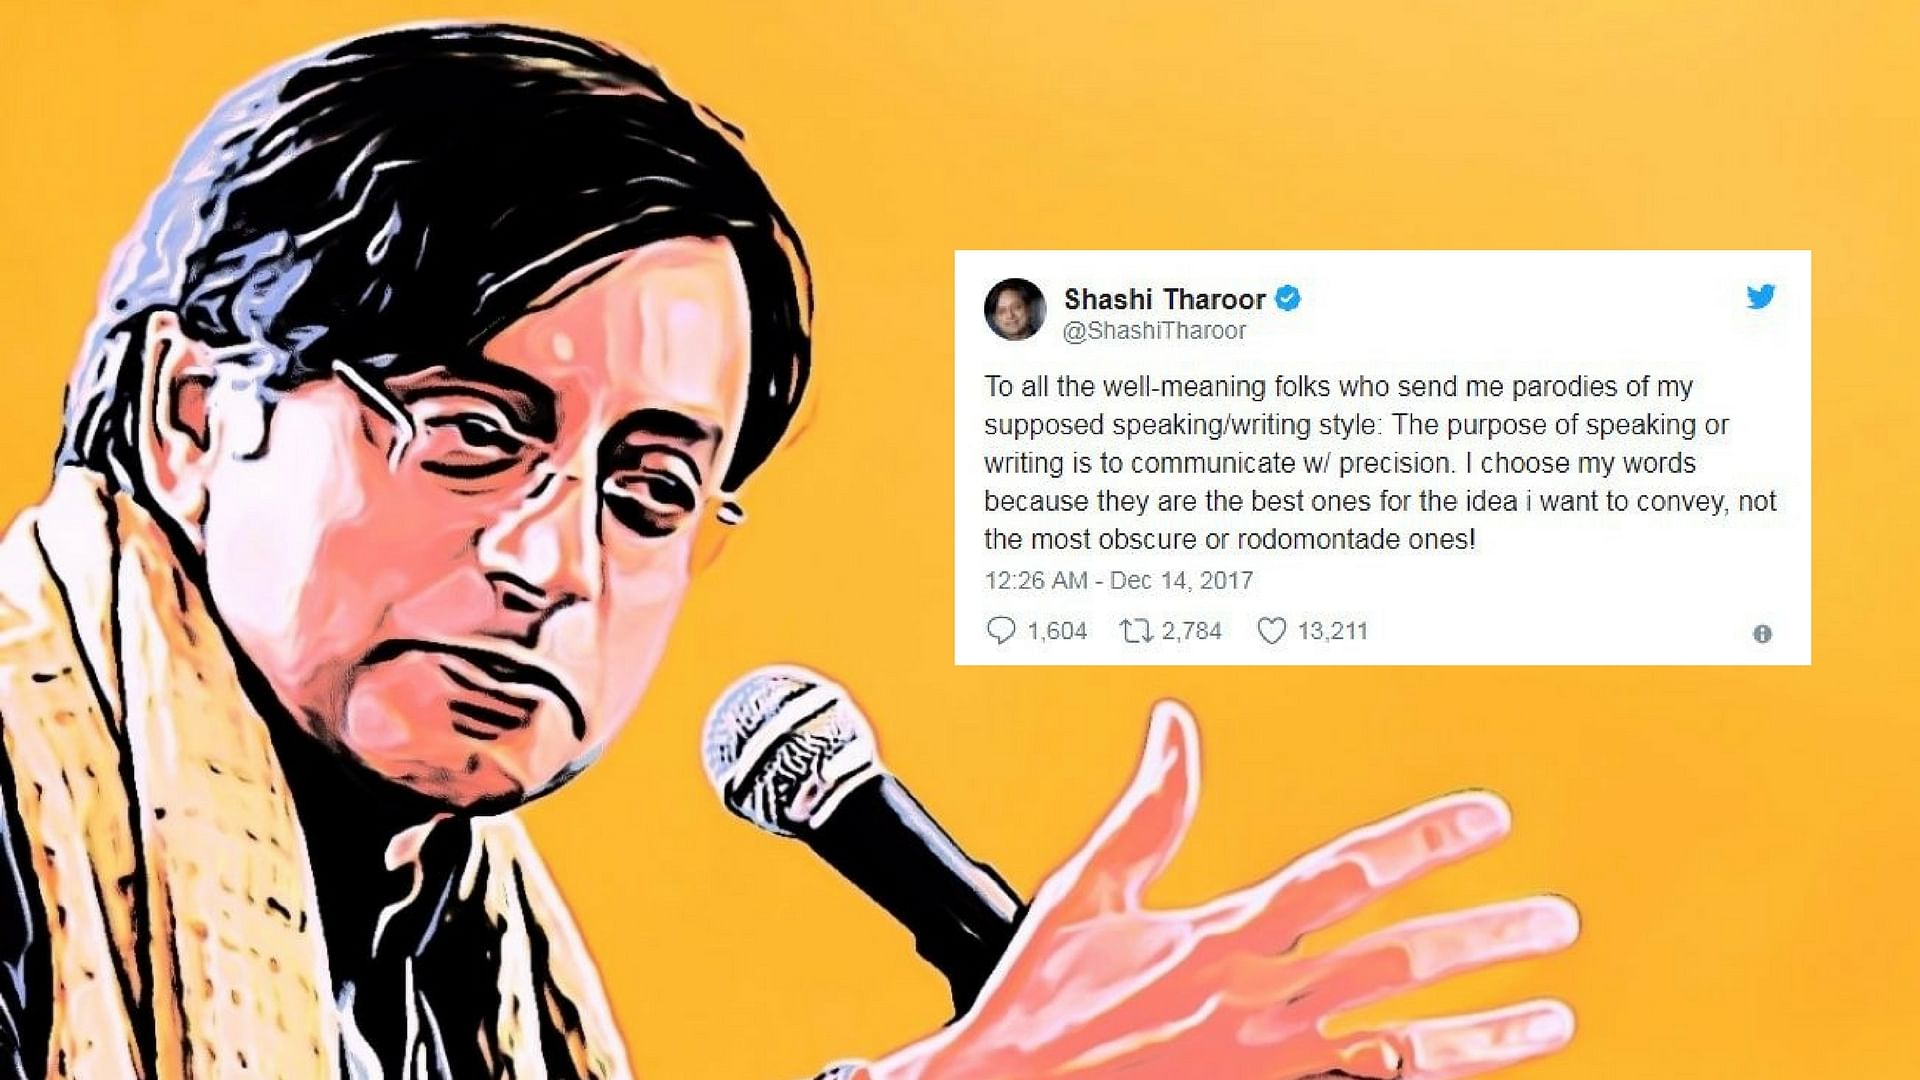 In this episode of ‘Tweeting Like Tharoor’, we attempt to be ‘precise’ with our words.